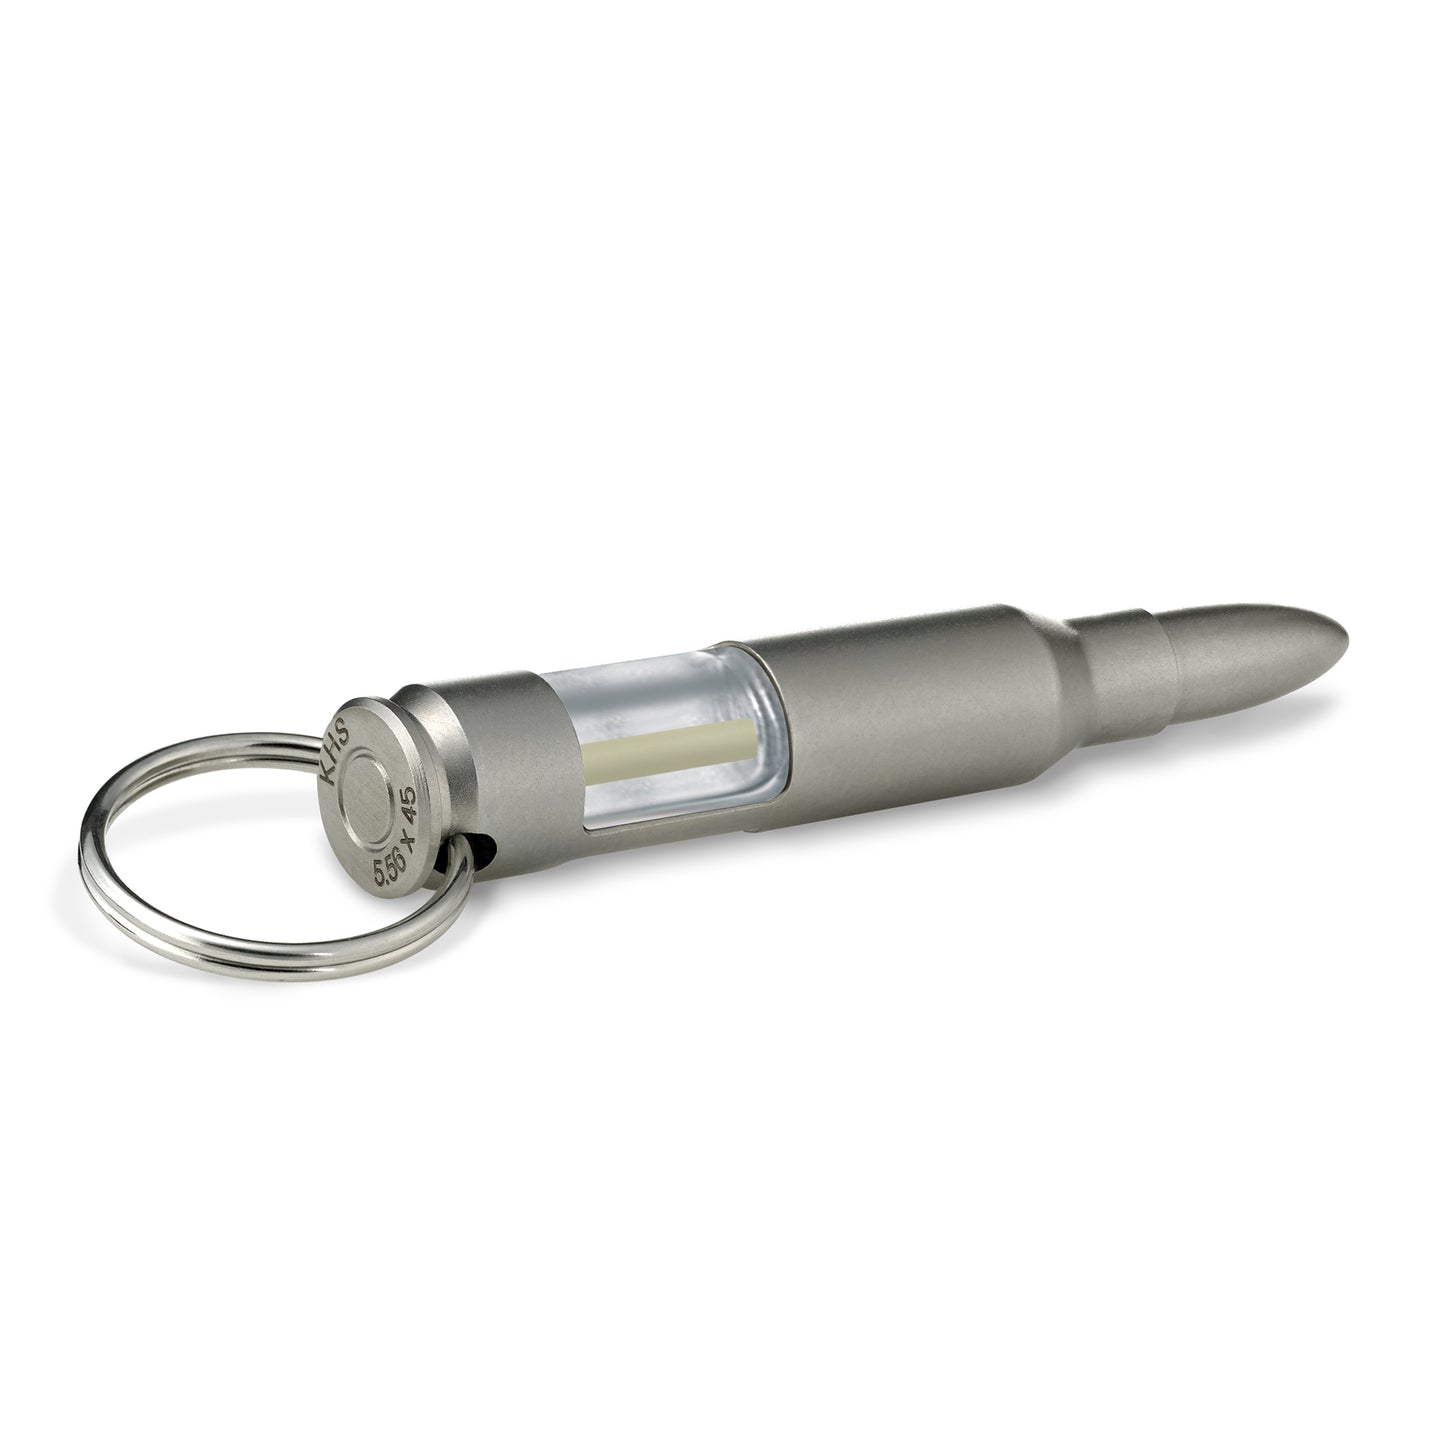 TRIGATAG® Cartridge with key ring